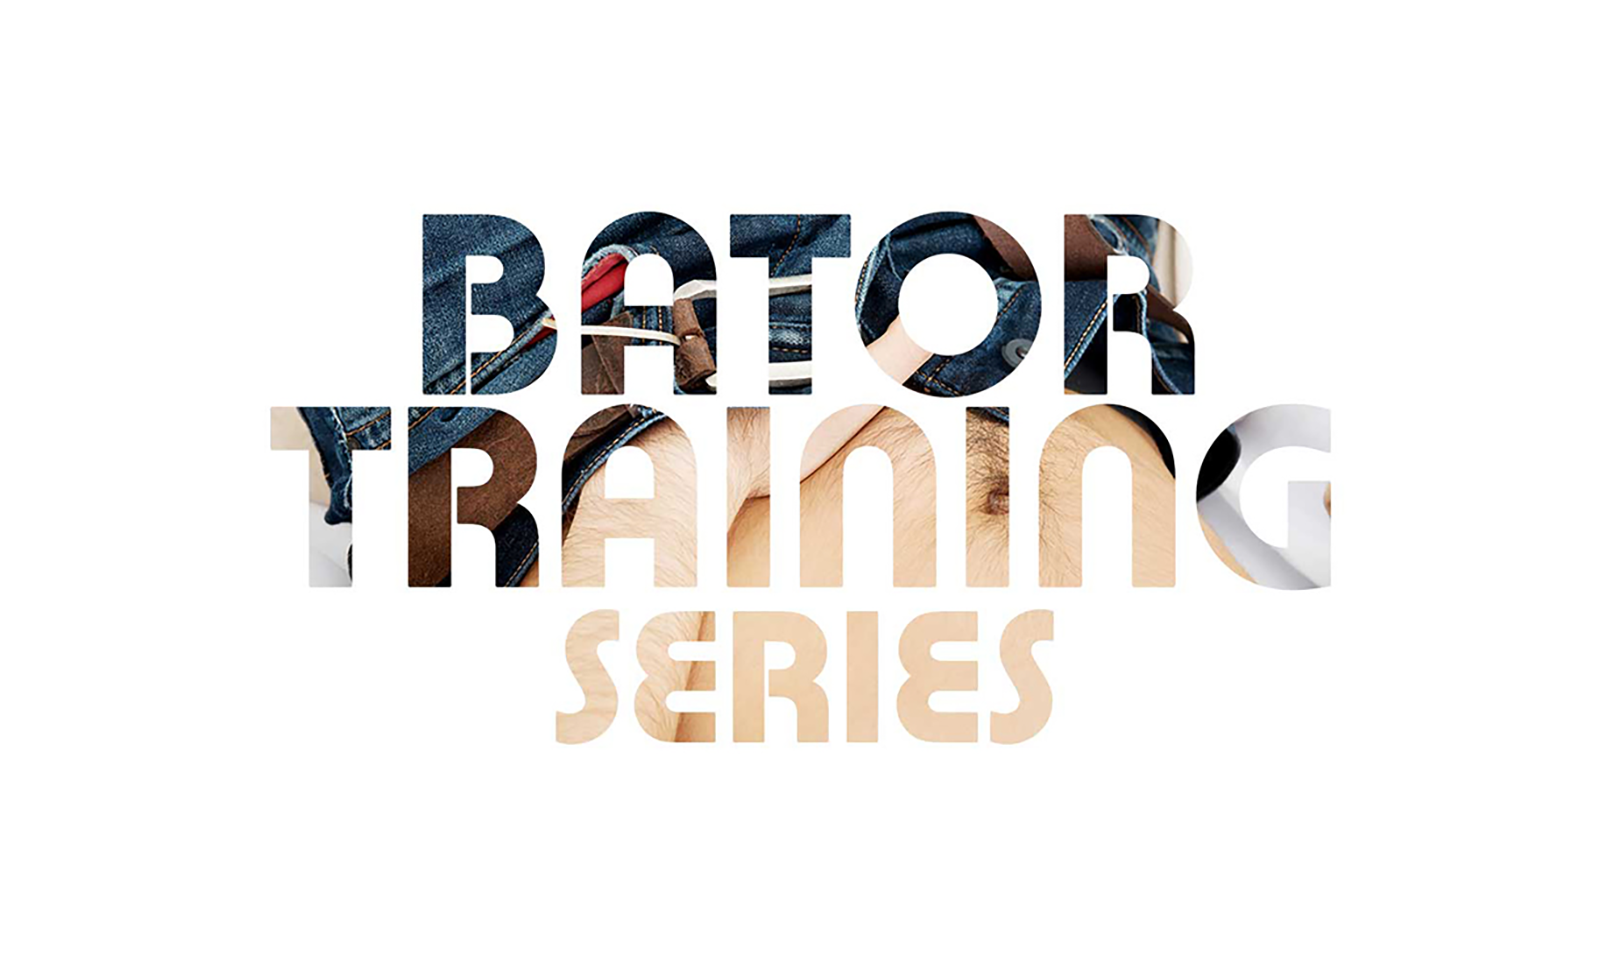 Hot Octopuss Partners With Bateworld For 'Bator Training Series'